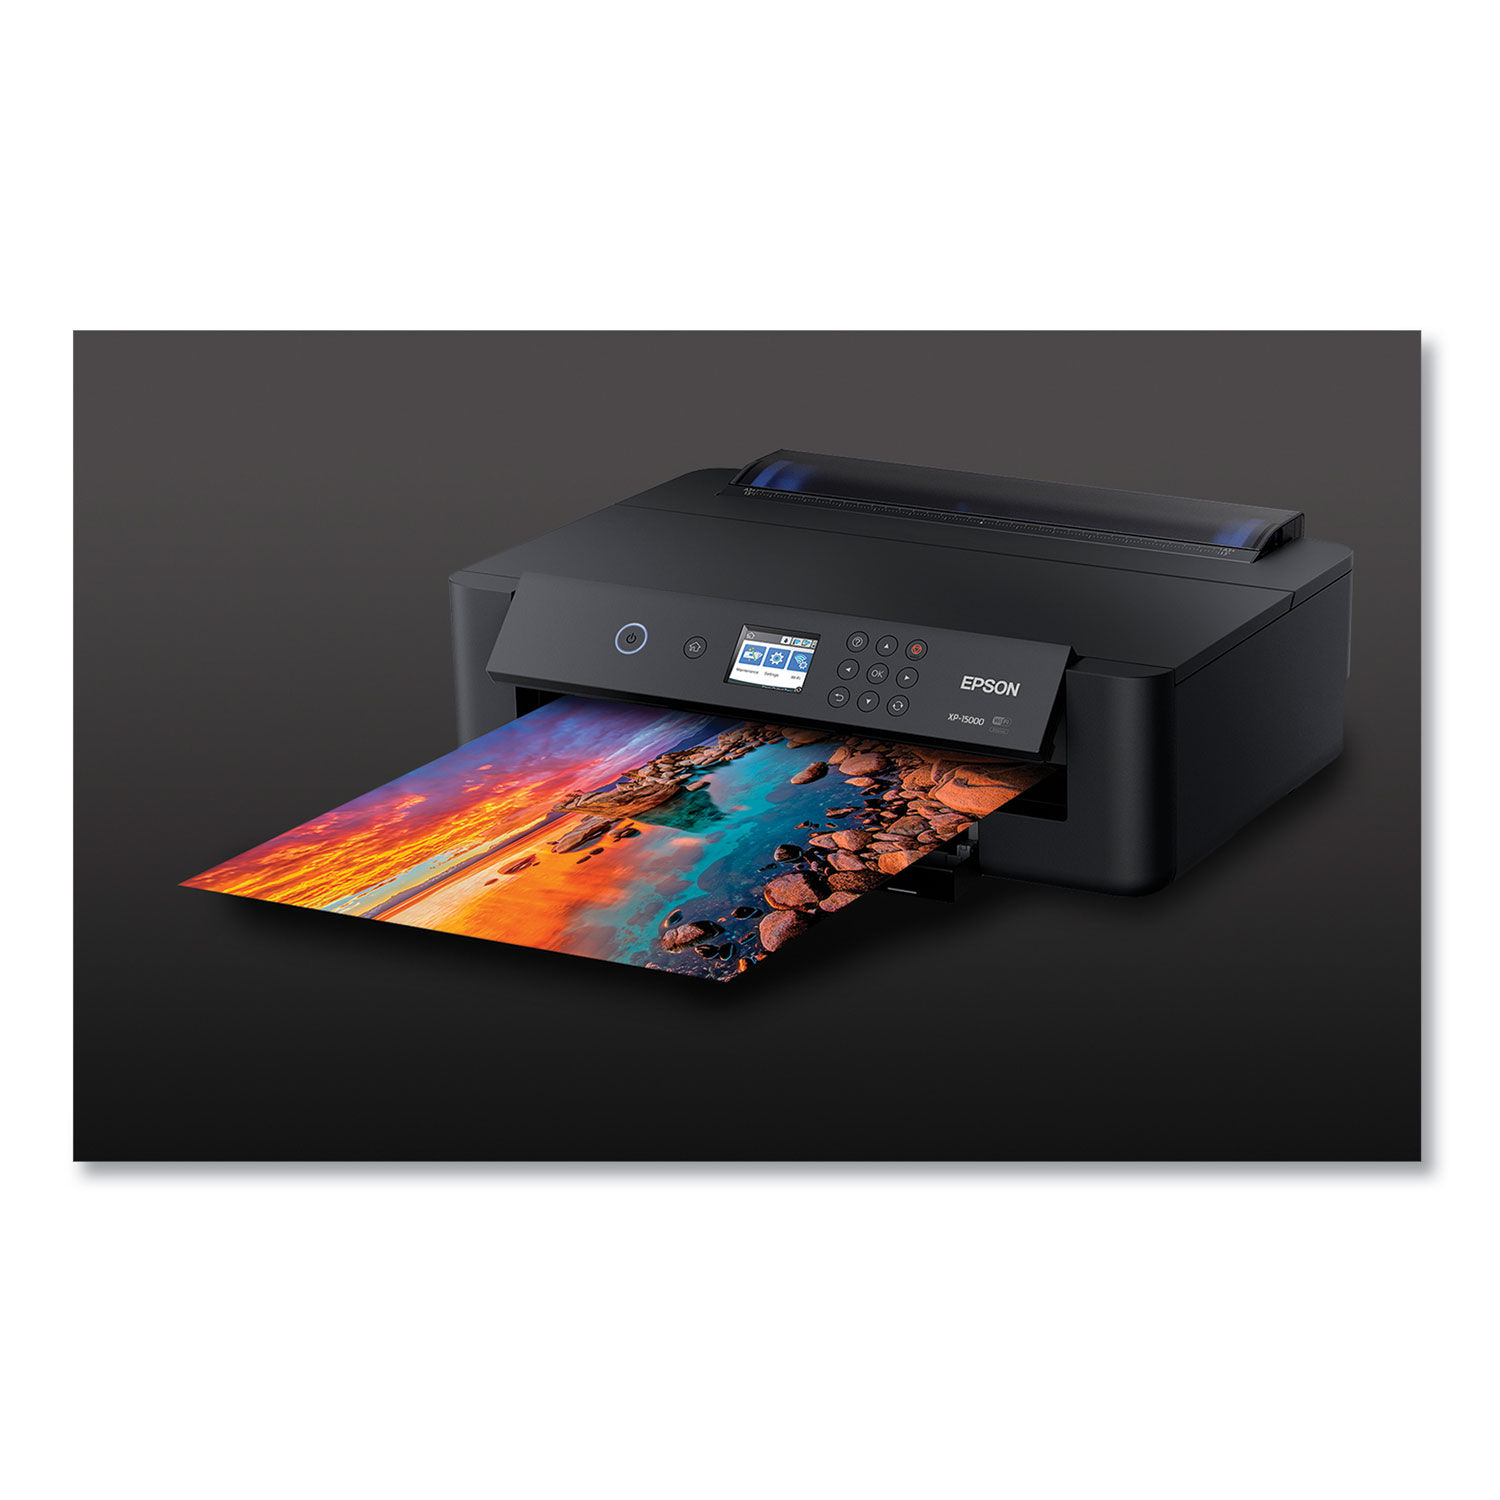 Expression Photo Hd Xp 15000 13 Wireless Wide Format Inkjet Printer By Epson® Epsc11cg43201 1025